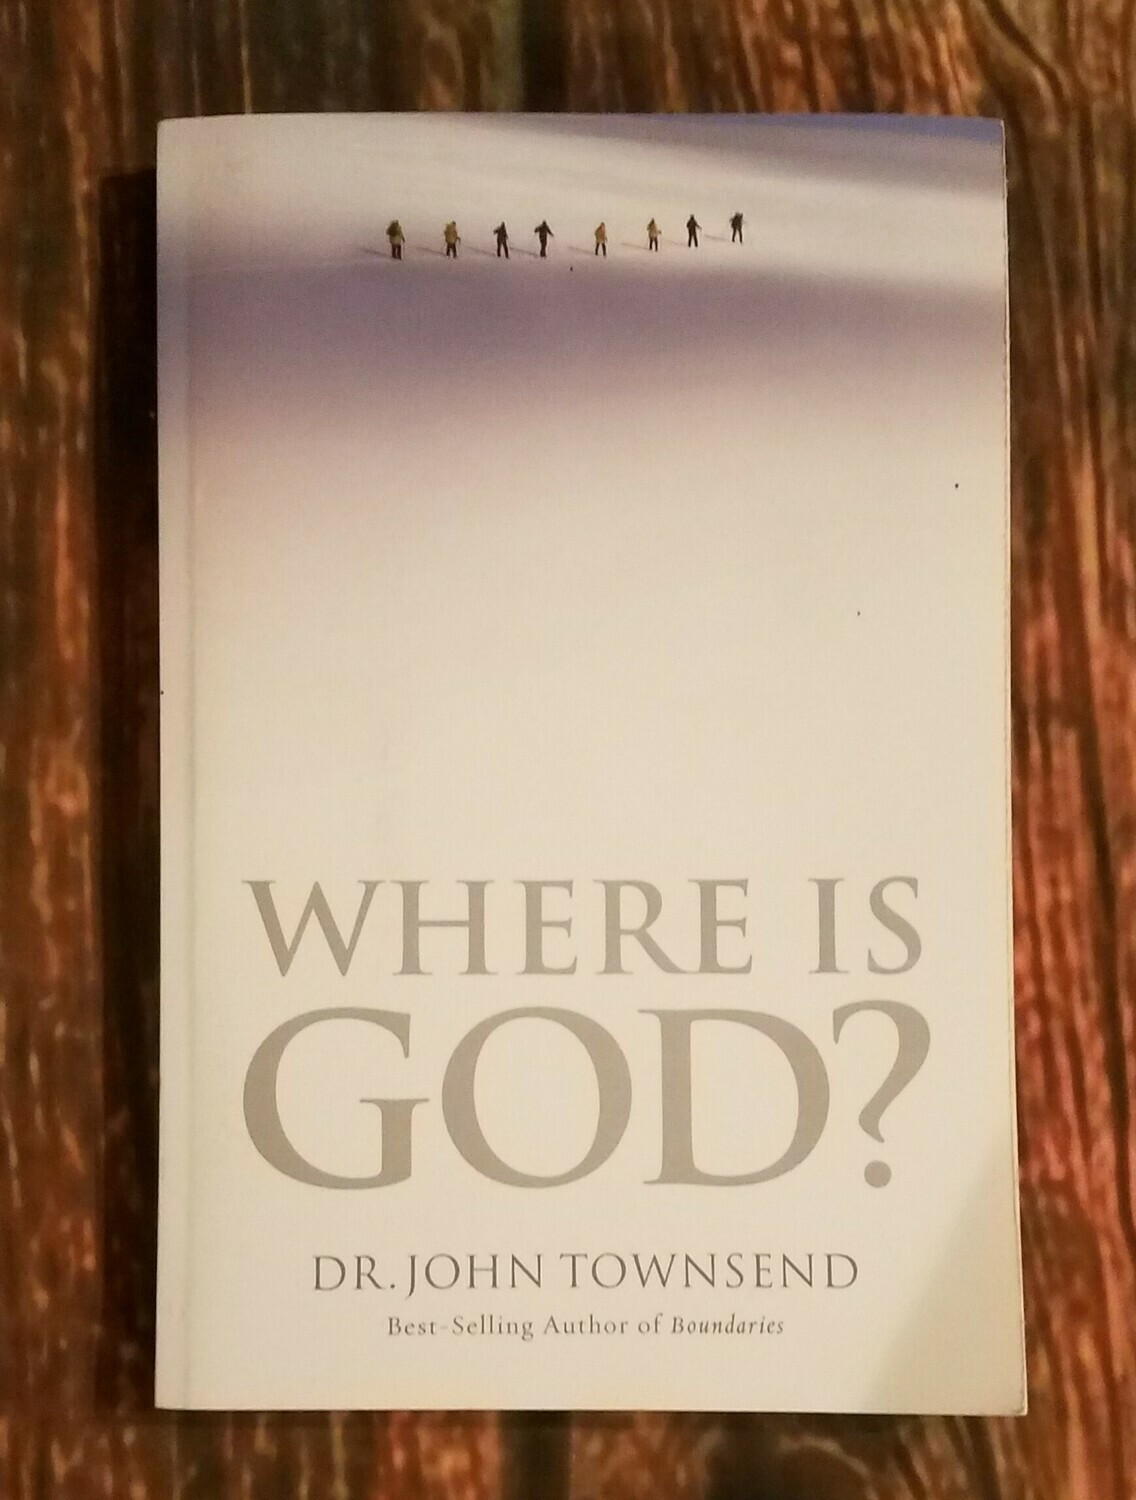 Where is God? by Dr. John Townsend